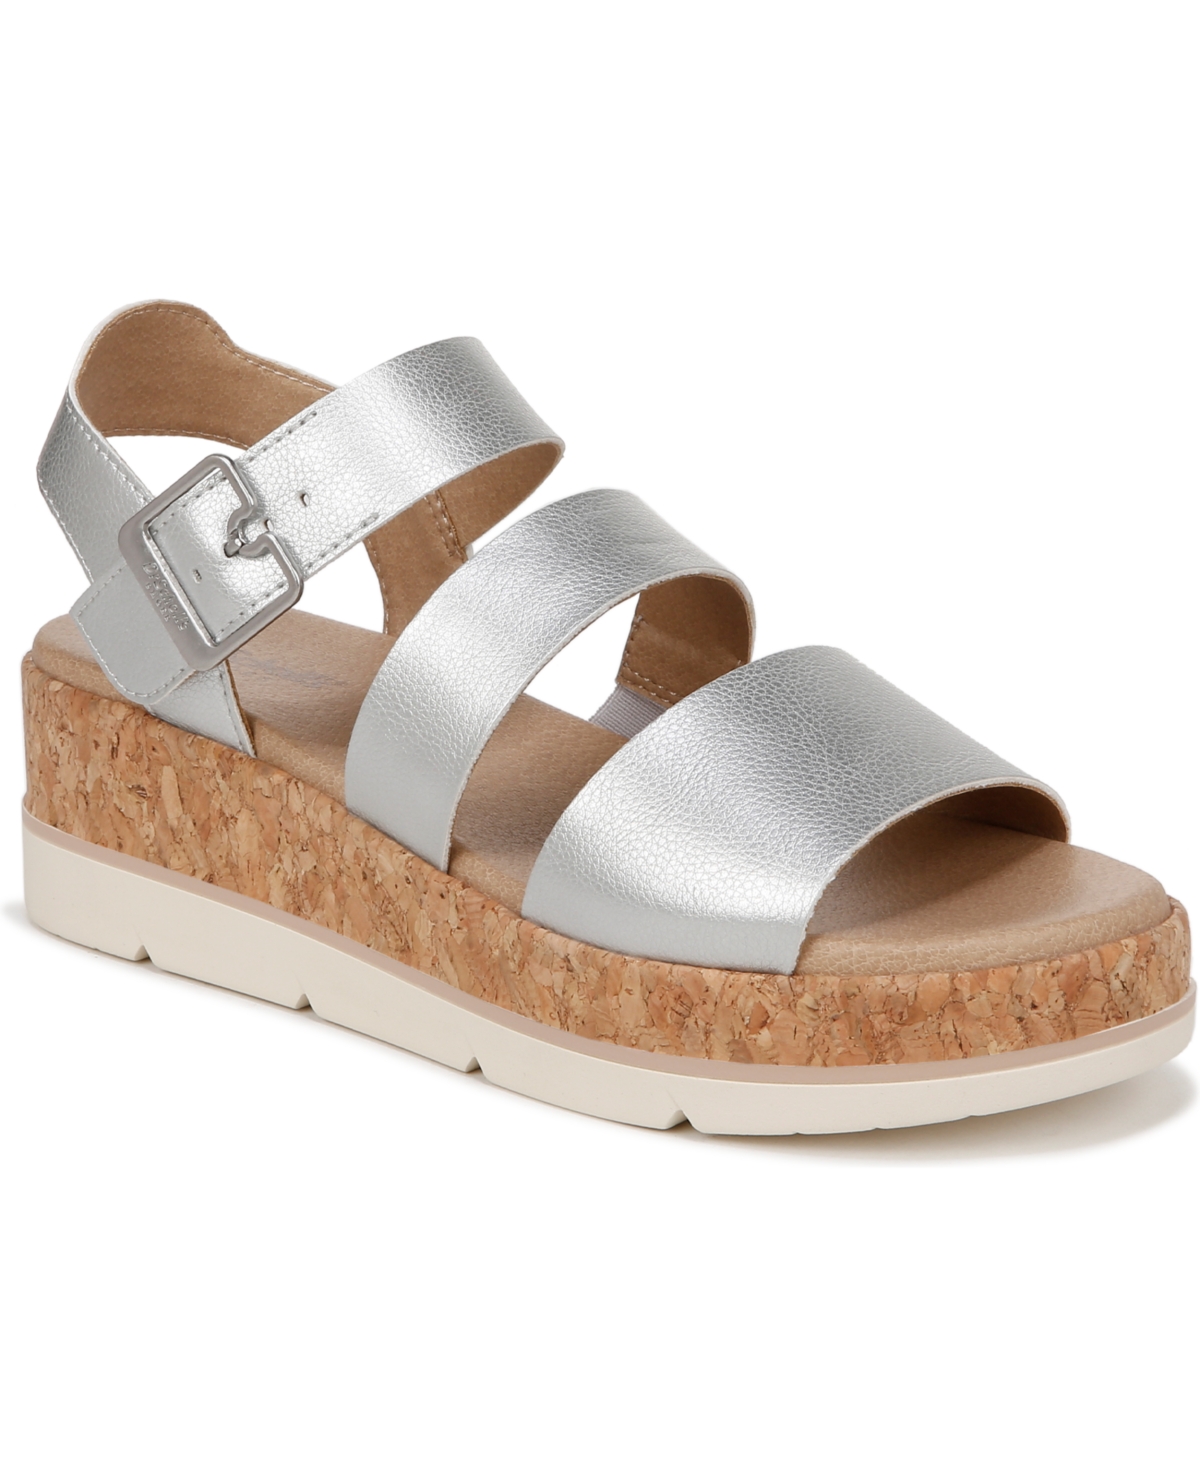 Dr. Scholl's Women's Once Twice Platform Sandals In Metallic Silver Faux Leather